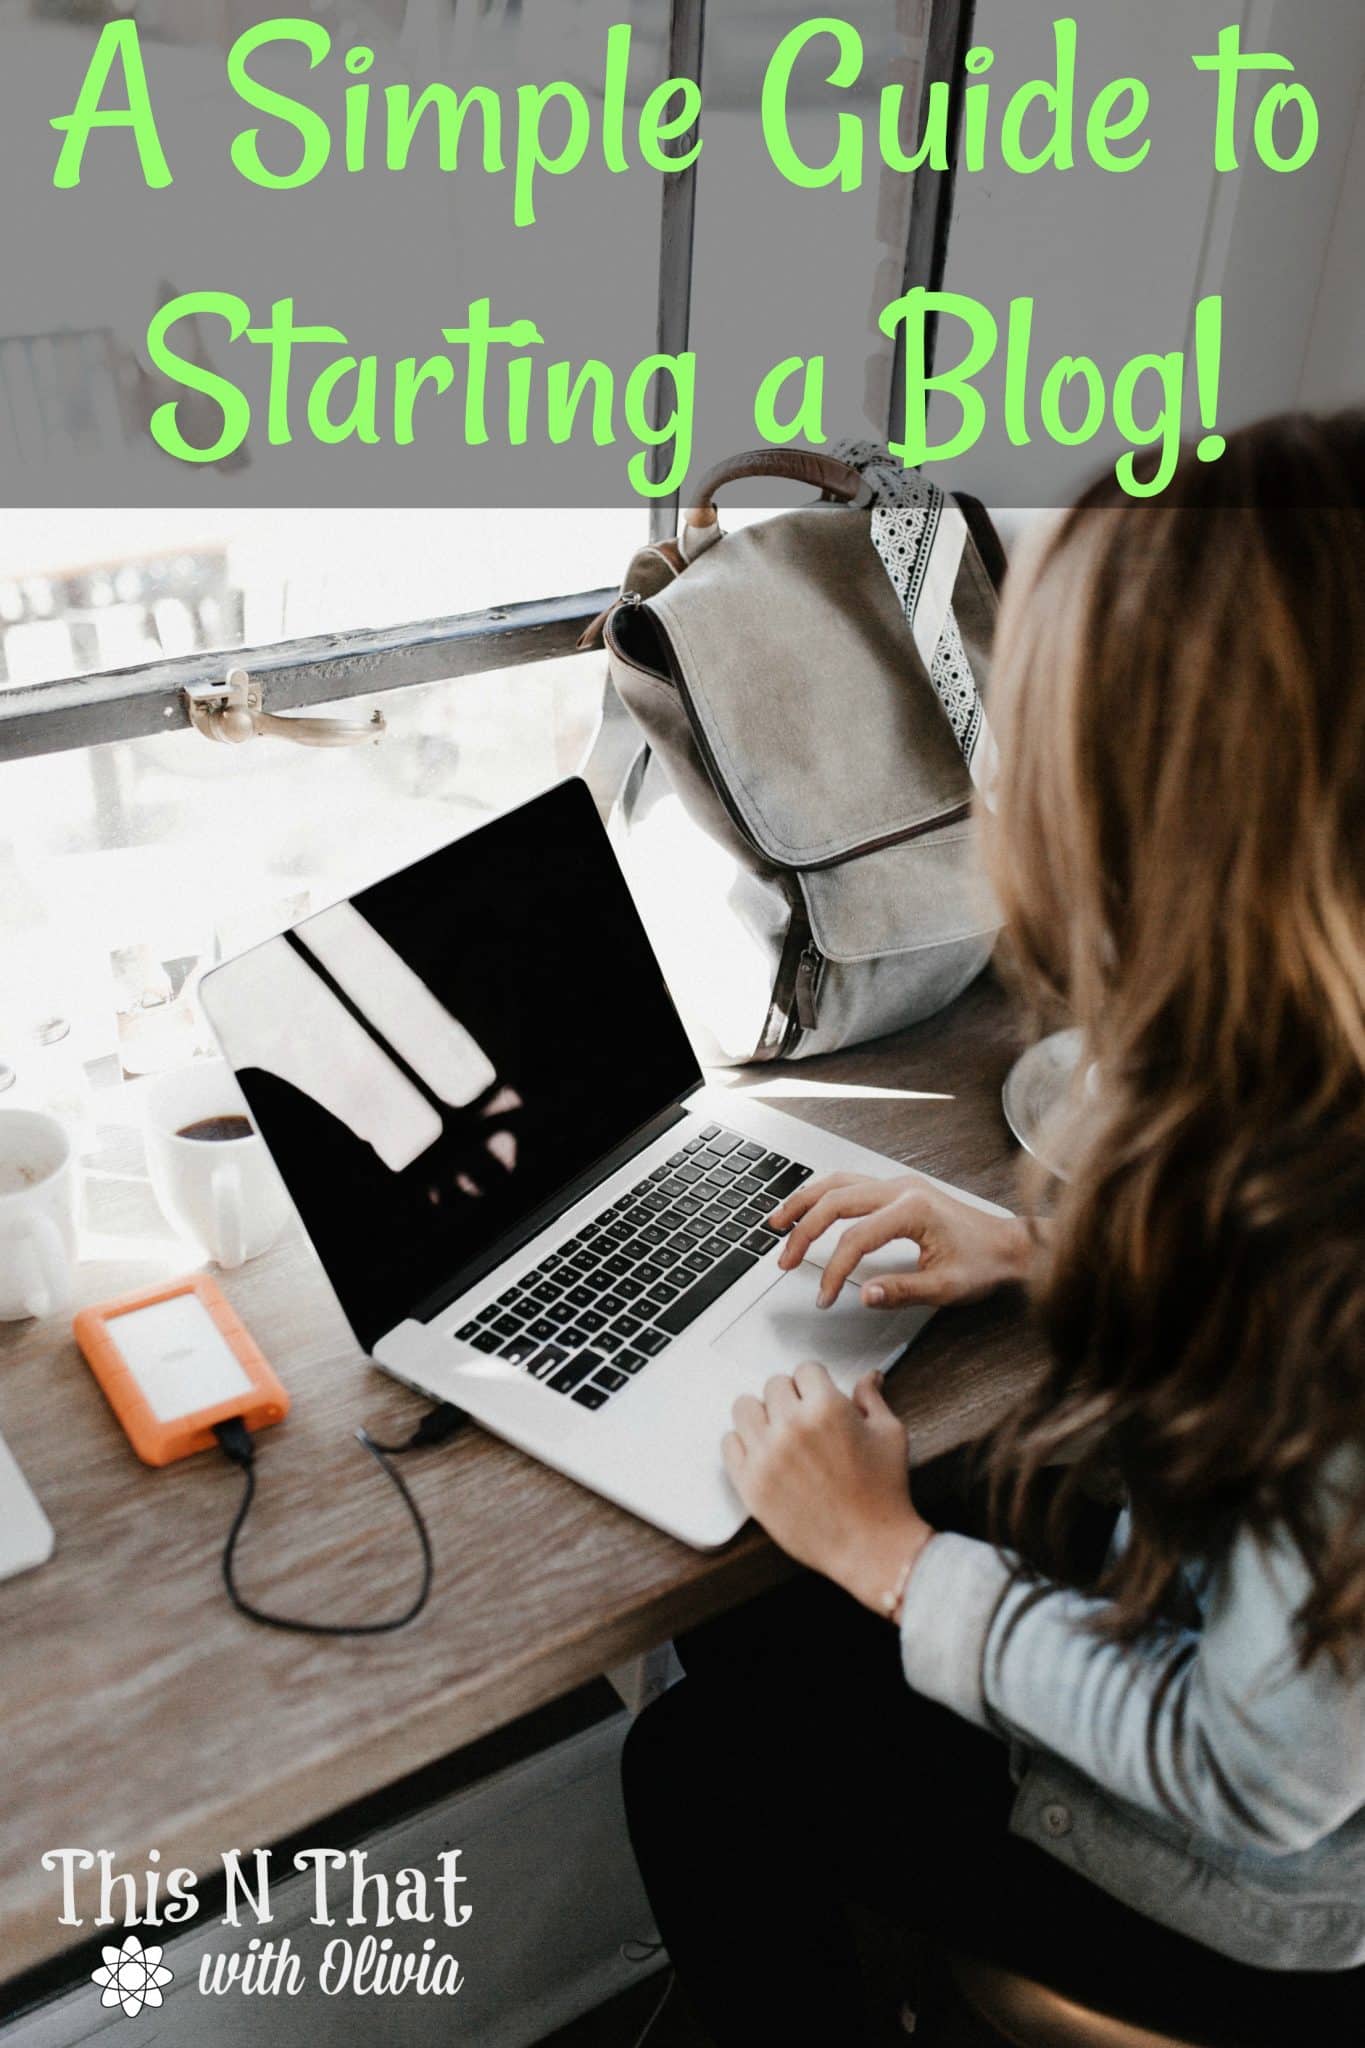 A Simple Guide to Starting a Blog! #Blogging101